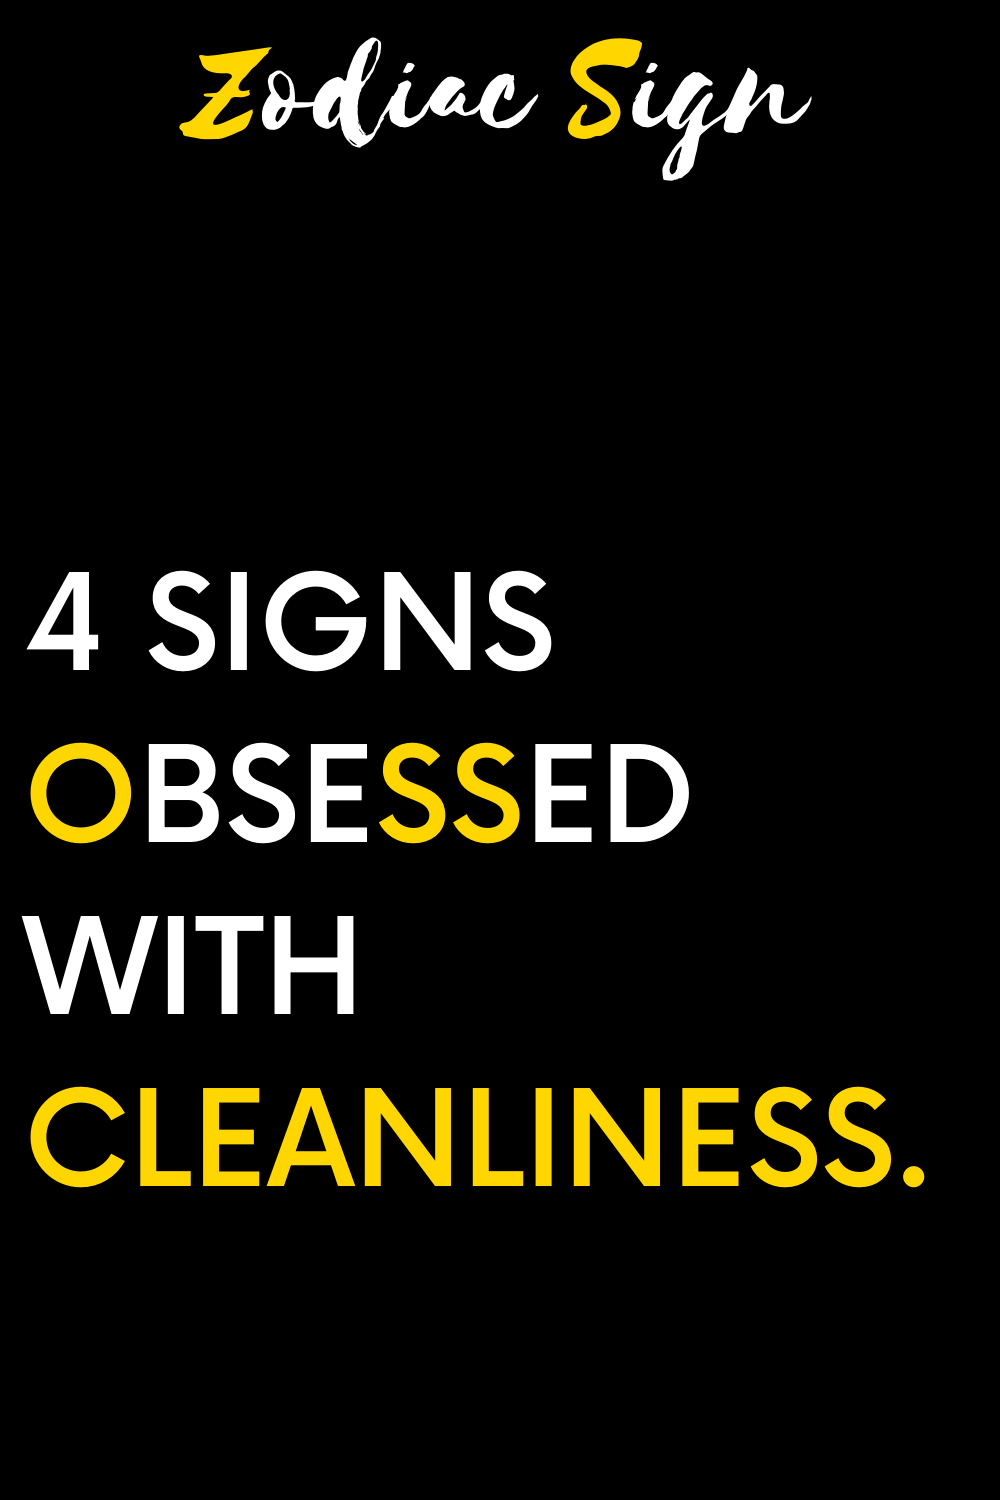 4 signs obsessed with cleanliness.